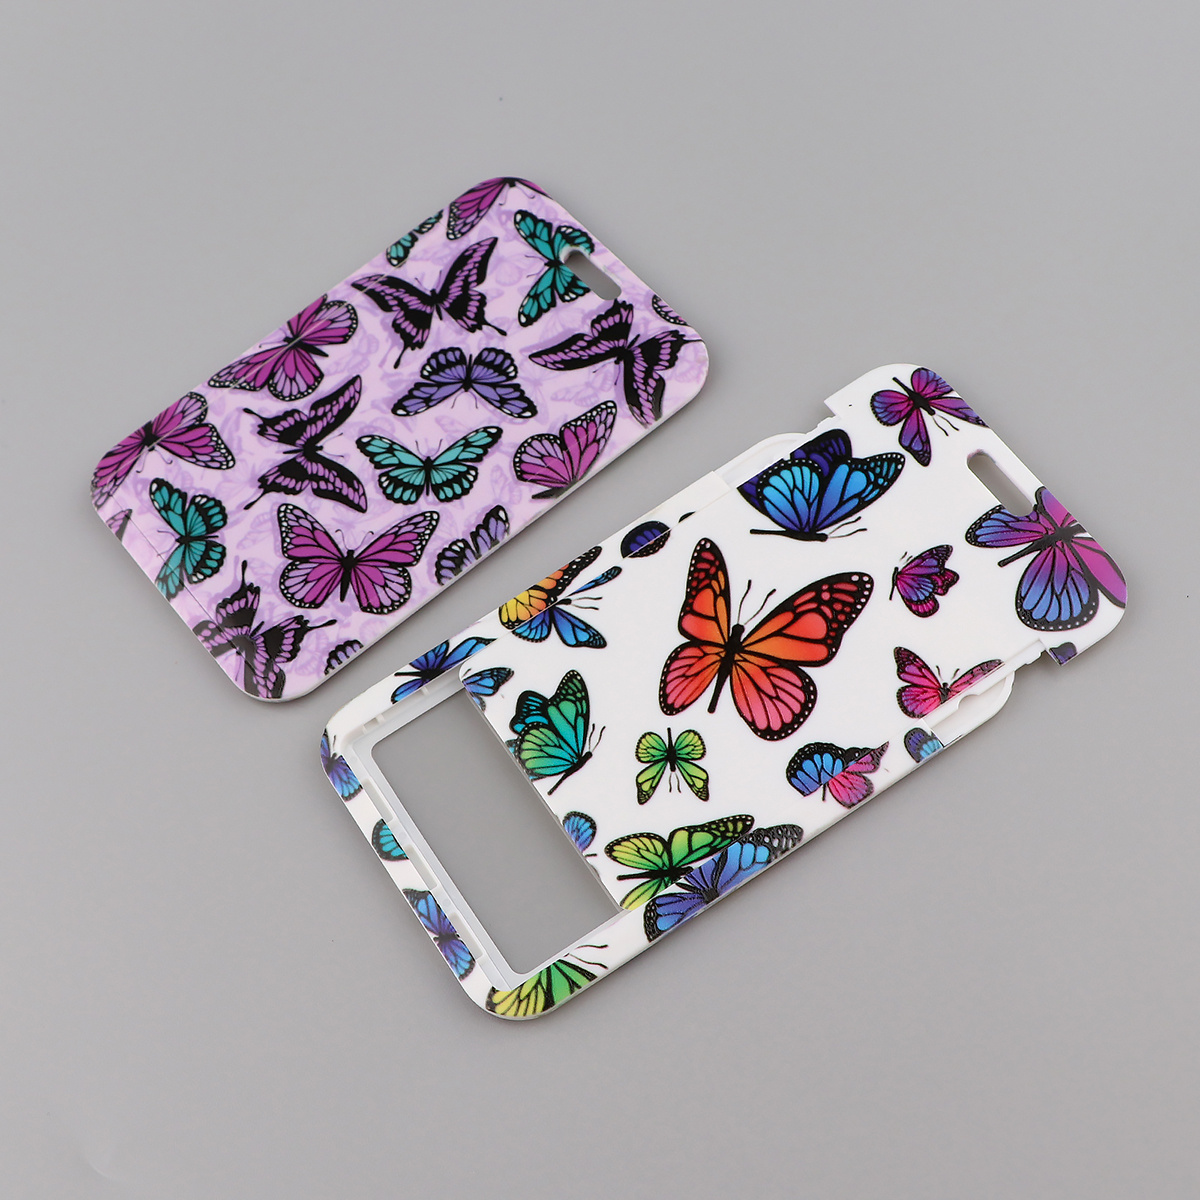 Butterfly Fashion Id Holder Neck Strap: Detachable Lanyards For